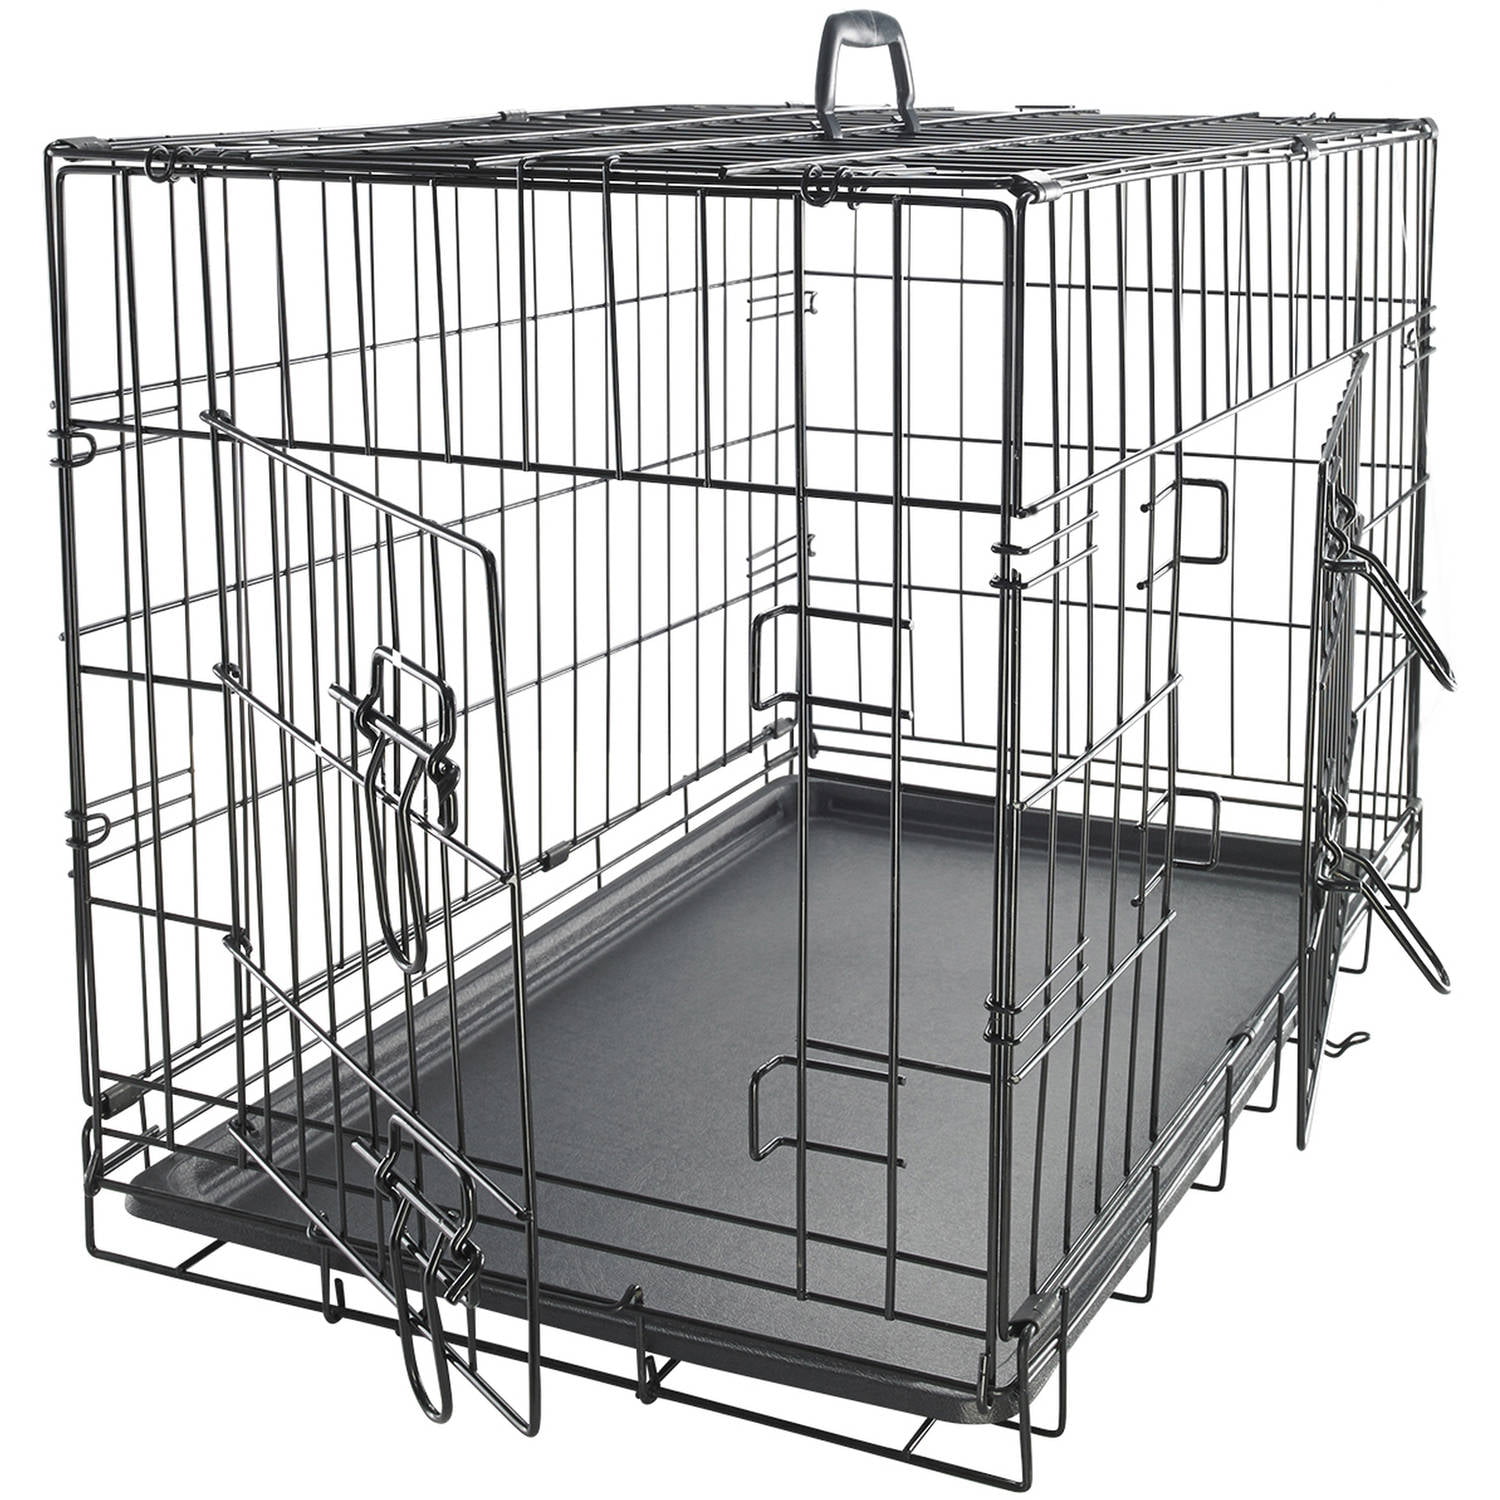 Indoor/ Outdoor PAWOLOGY Wire Dog Crate Large w/ Divider Double Door,Heavy Duty Collapsible and Portable Folding Metal Kennel Removable Tray